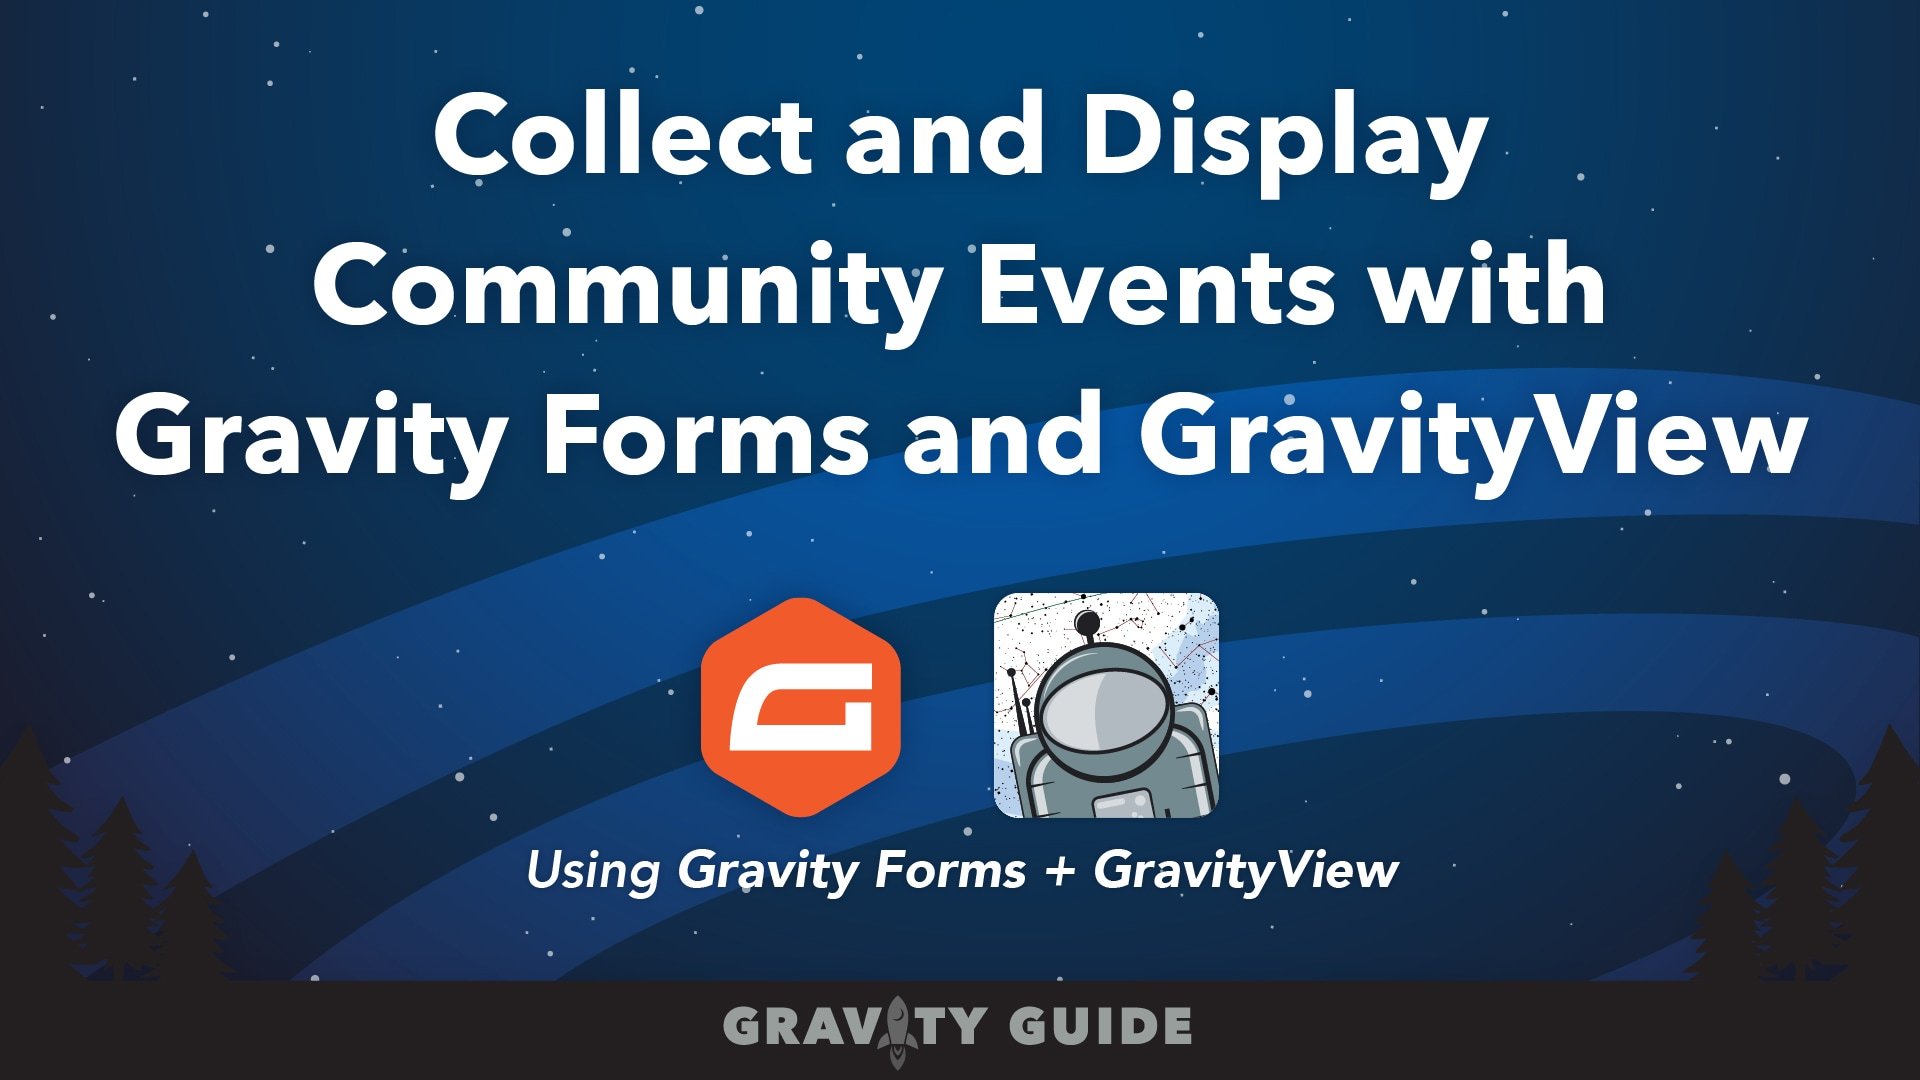 Collect and Display Community Events with Gravity Forms and GravityView